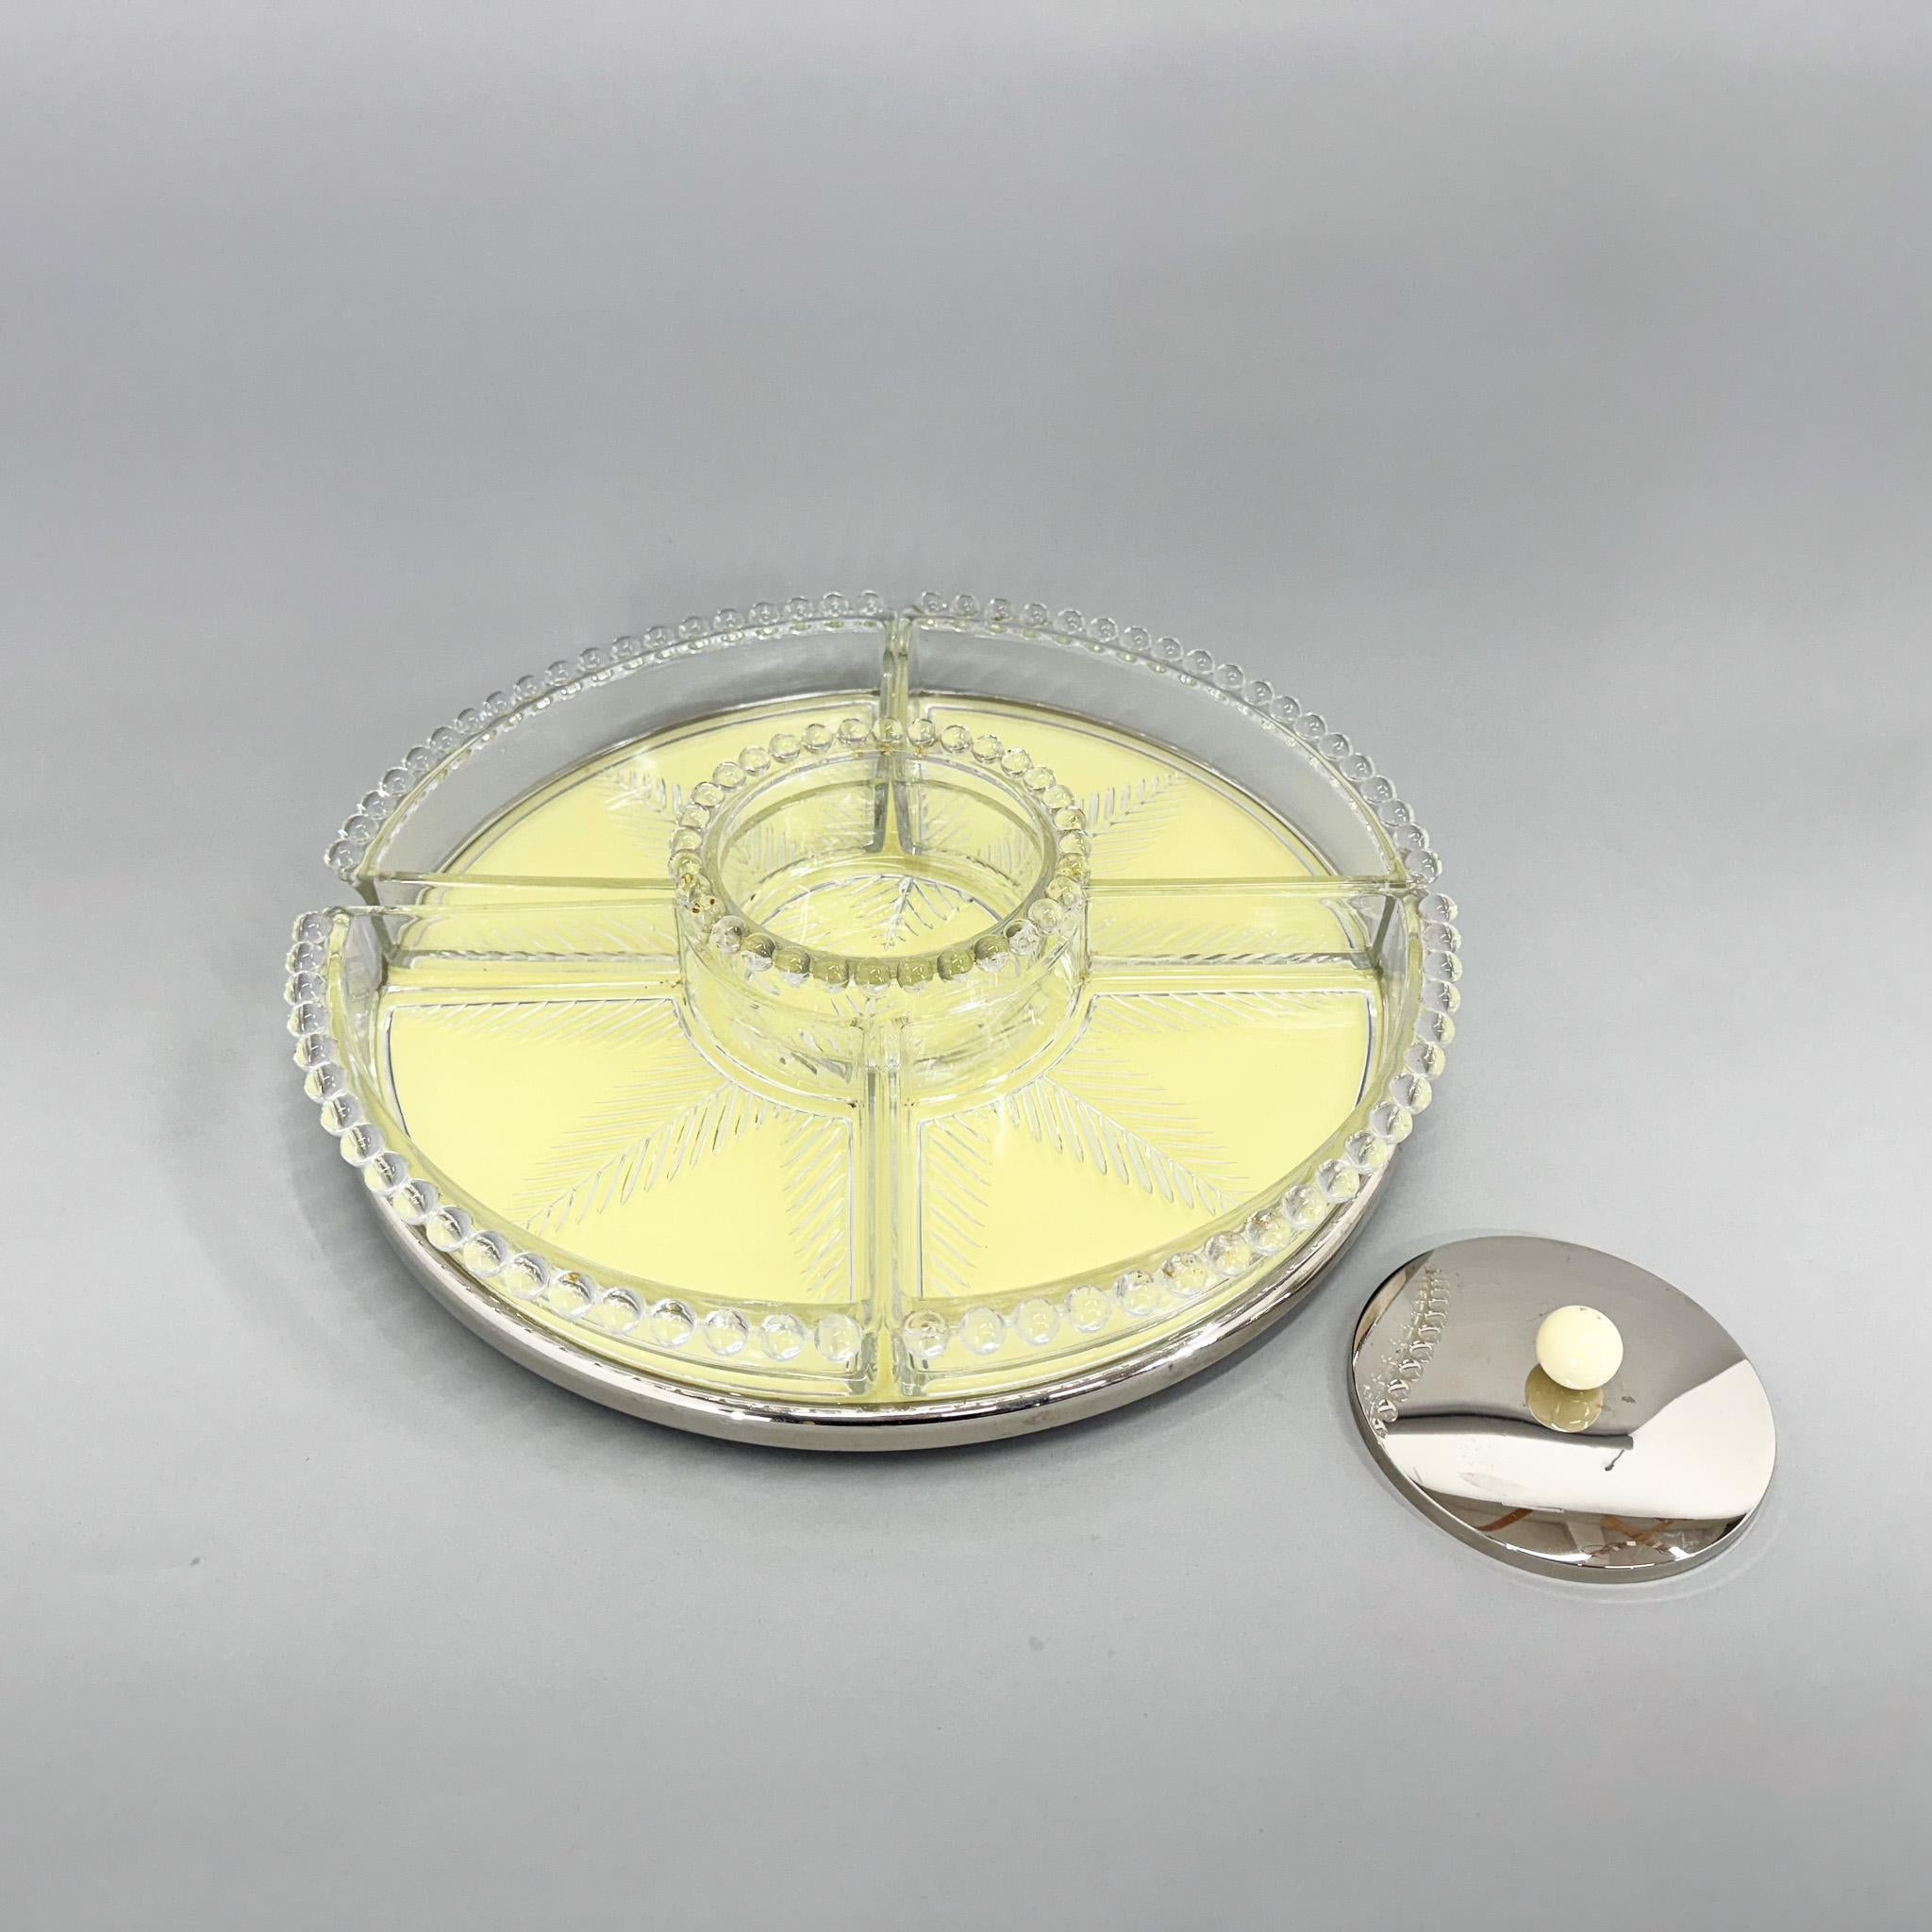 Czech Art Deco Chrome & Glass Rotating Tray with Containers, 1930's For Sale